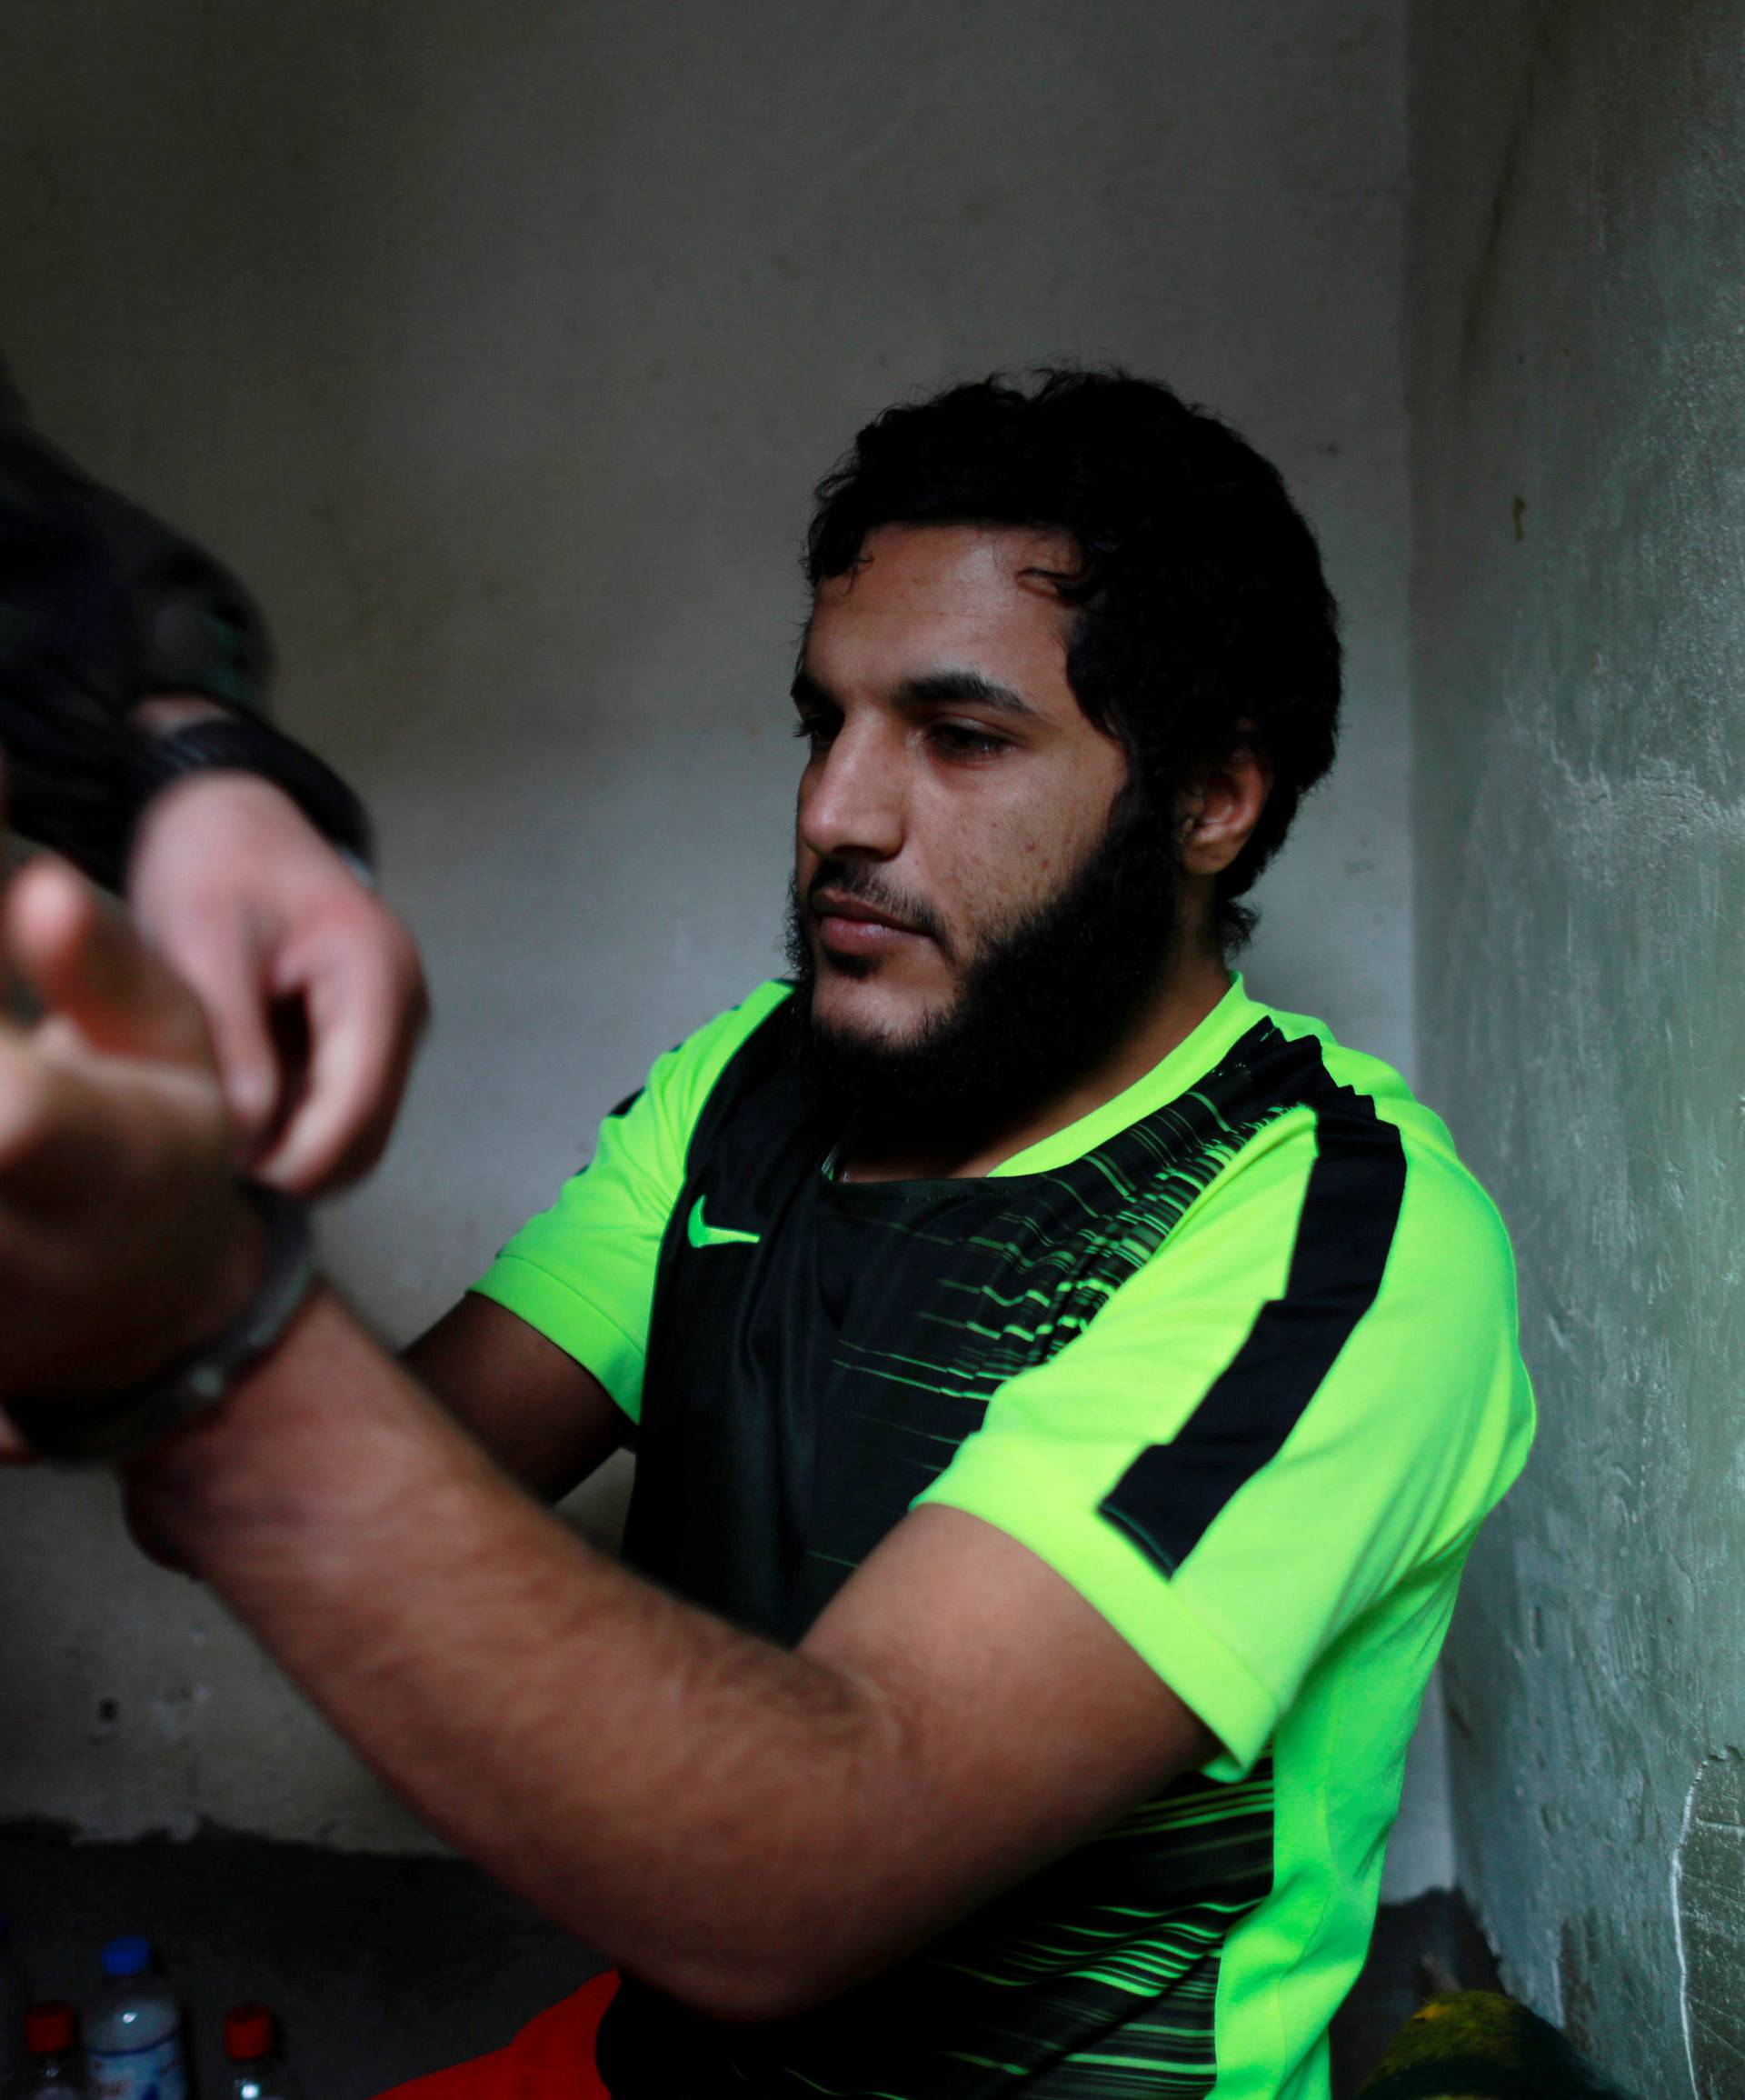 An Islamic State member has his cuff removed by a counter-terrorism agent inside his prison cell in Sulaimaniya